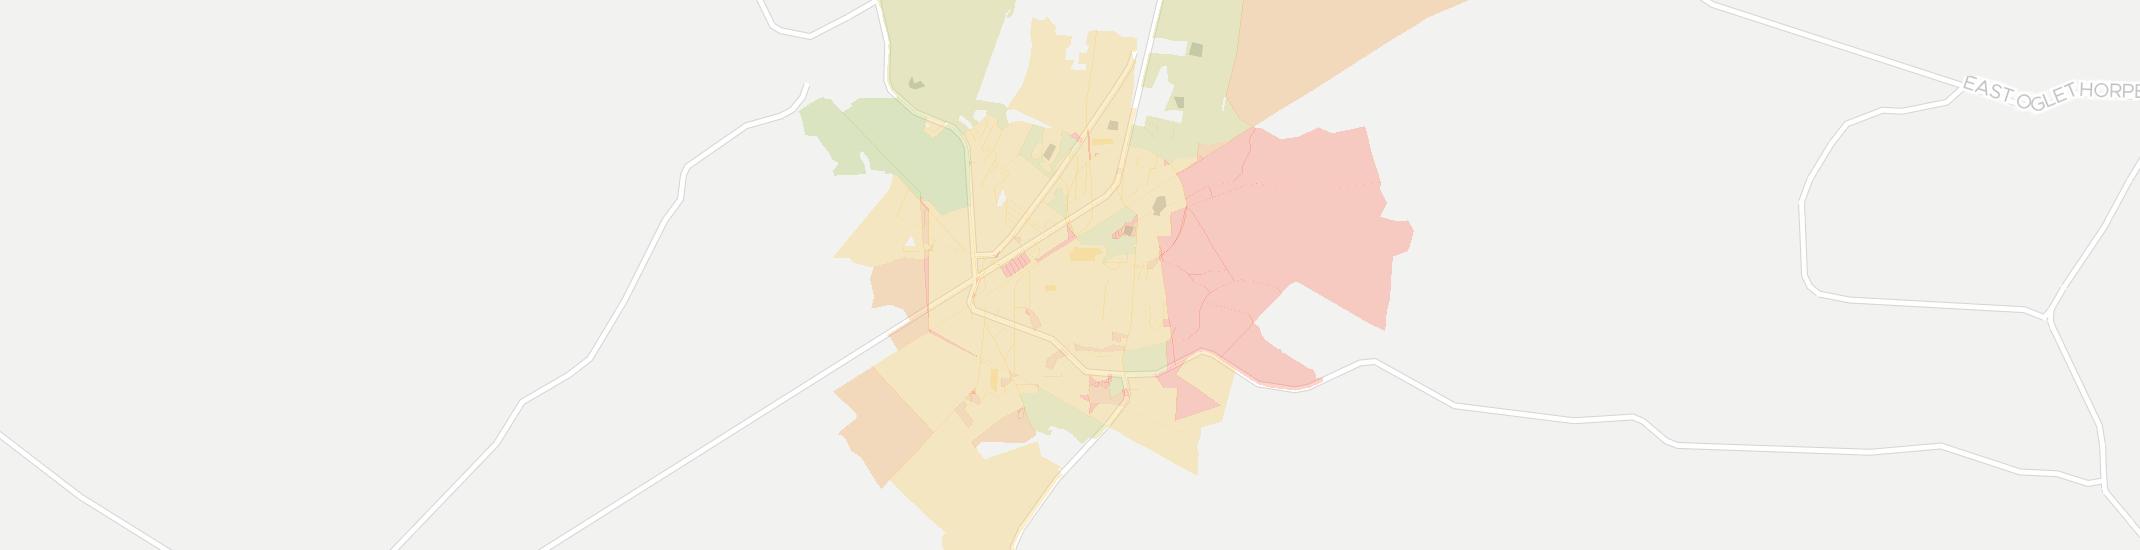 Walthourville Internet Competition Map. Click for interactive map.